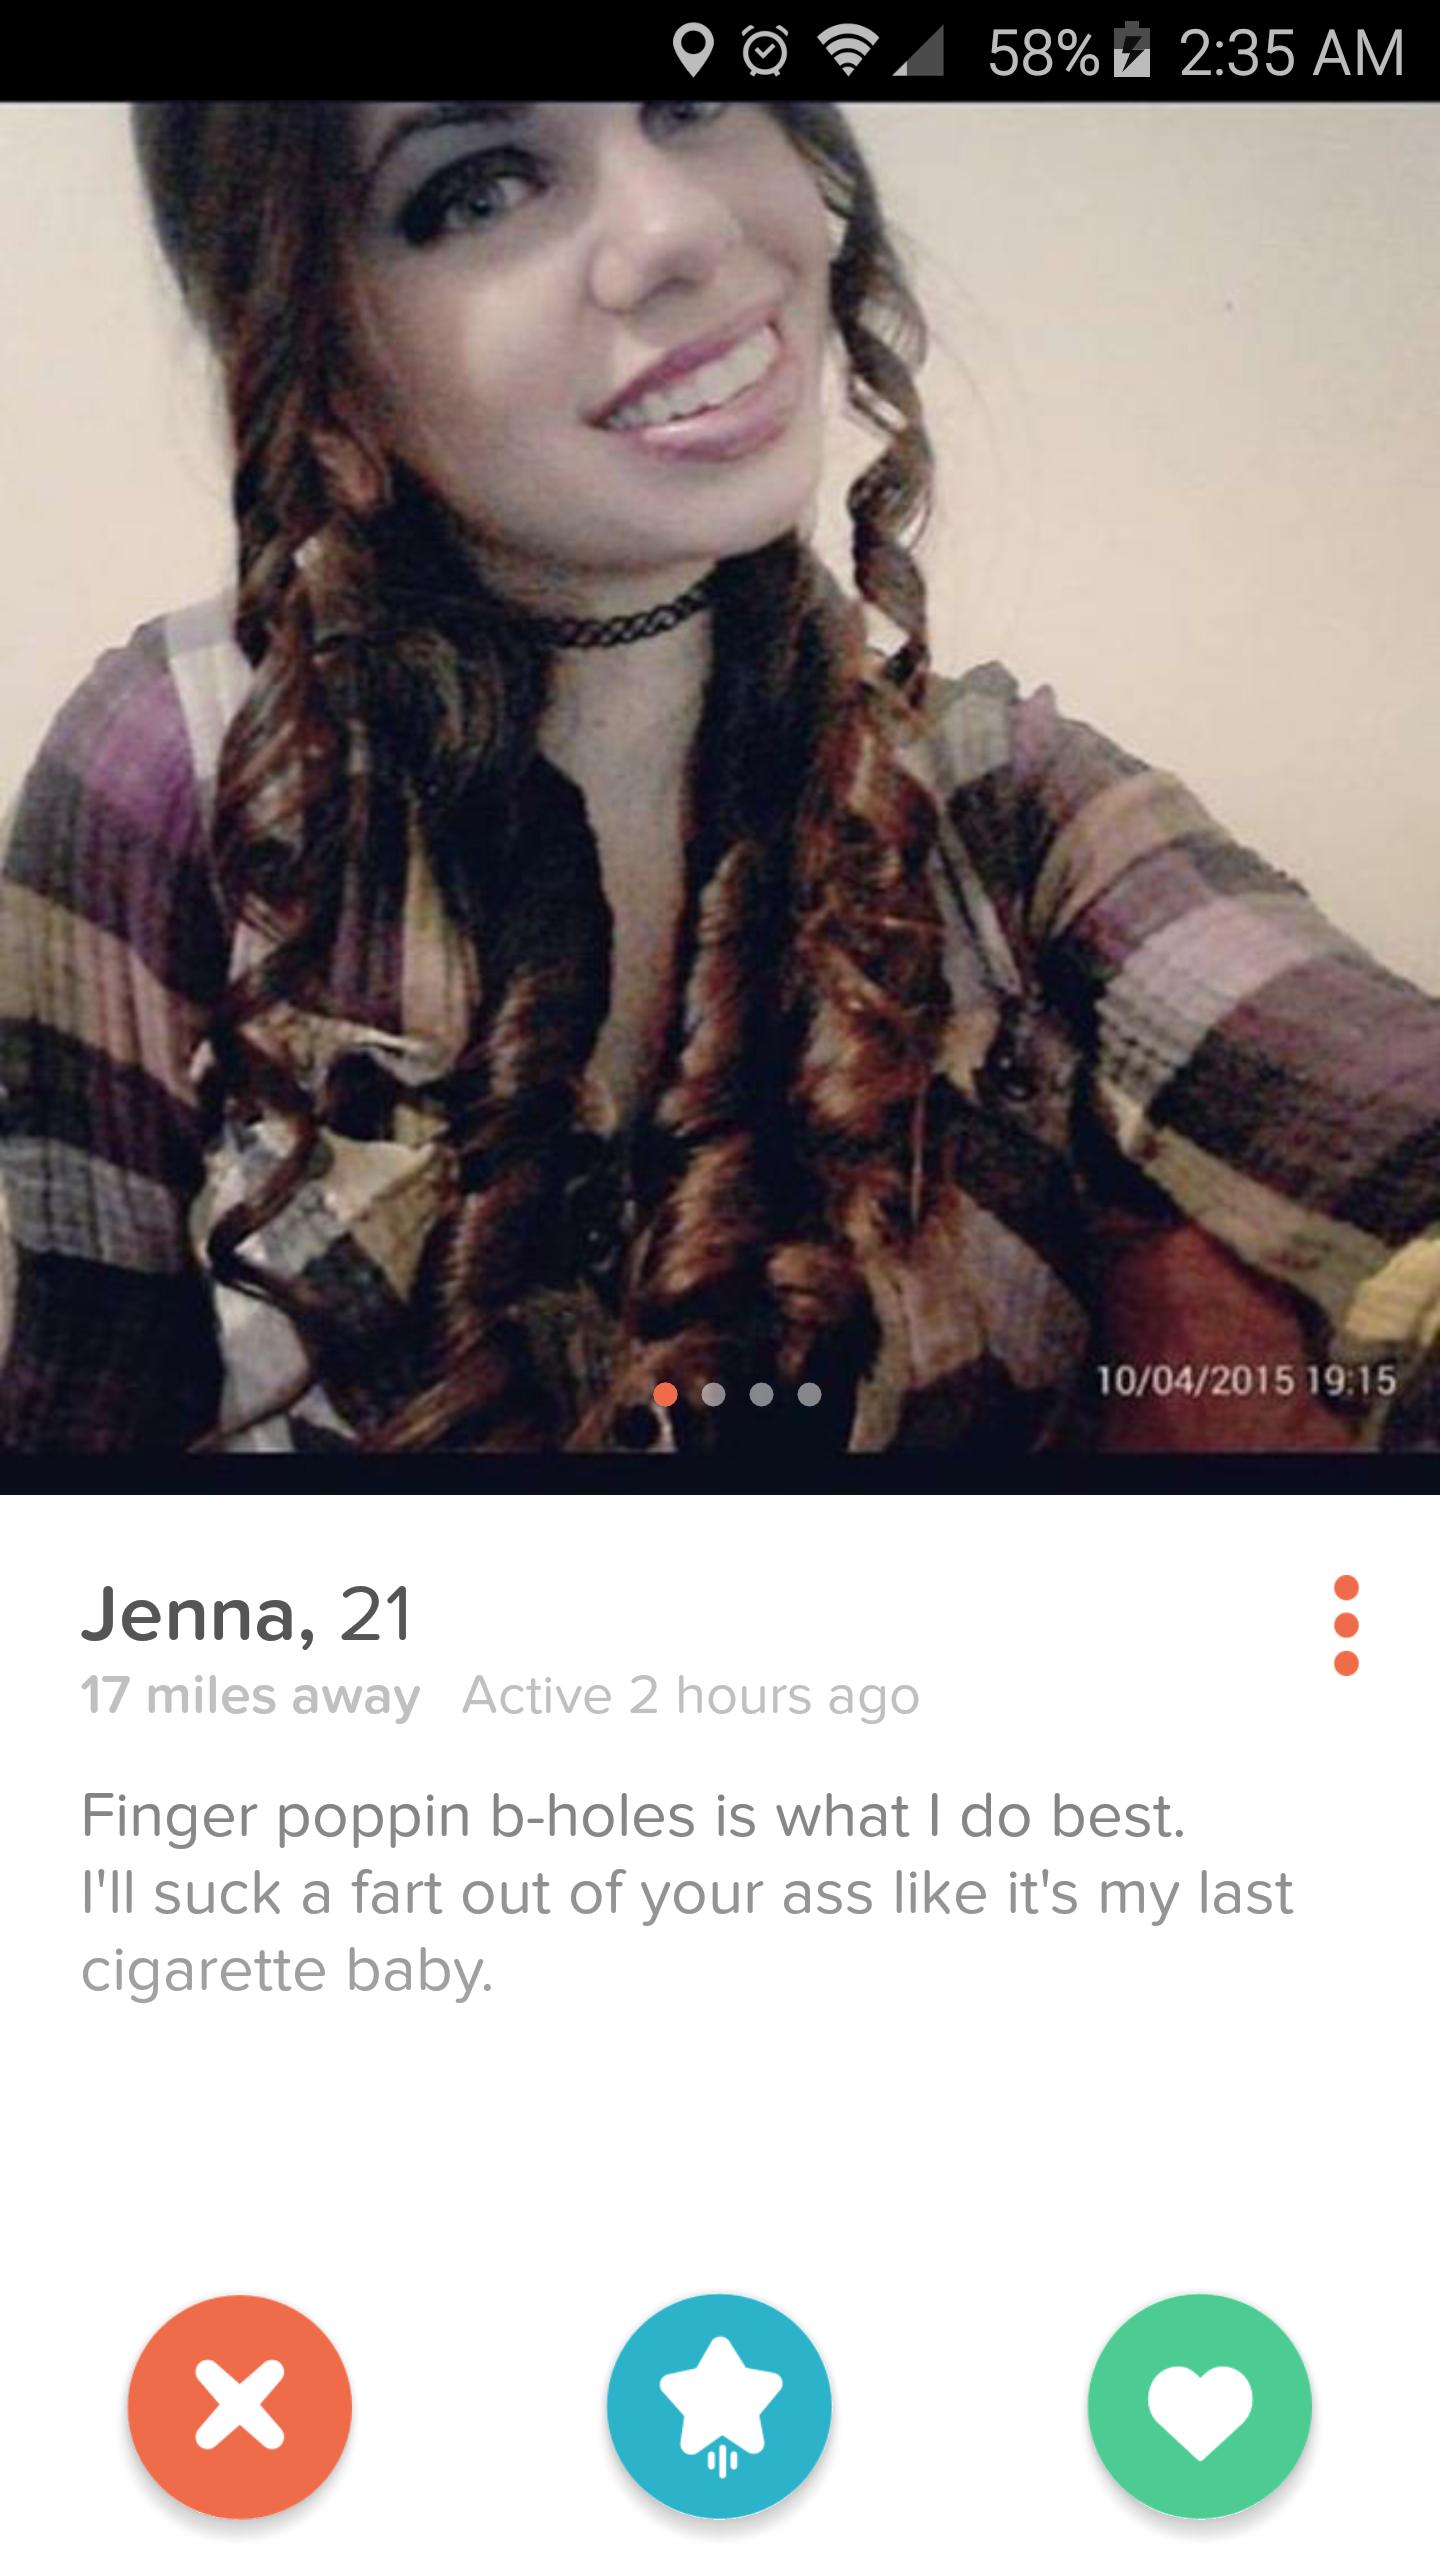 tinder - tinder wtf - 58% 7 10042015 Jenna, 21 17 miles away Active 2 hours ago Finger poppin bholes is what I do best. I'll suck a fart out of your ass it's my last cigarette baby.